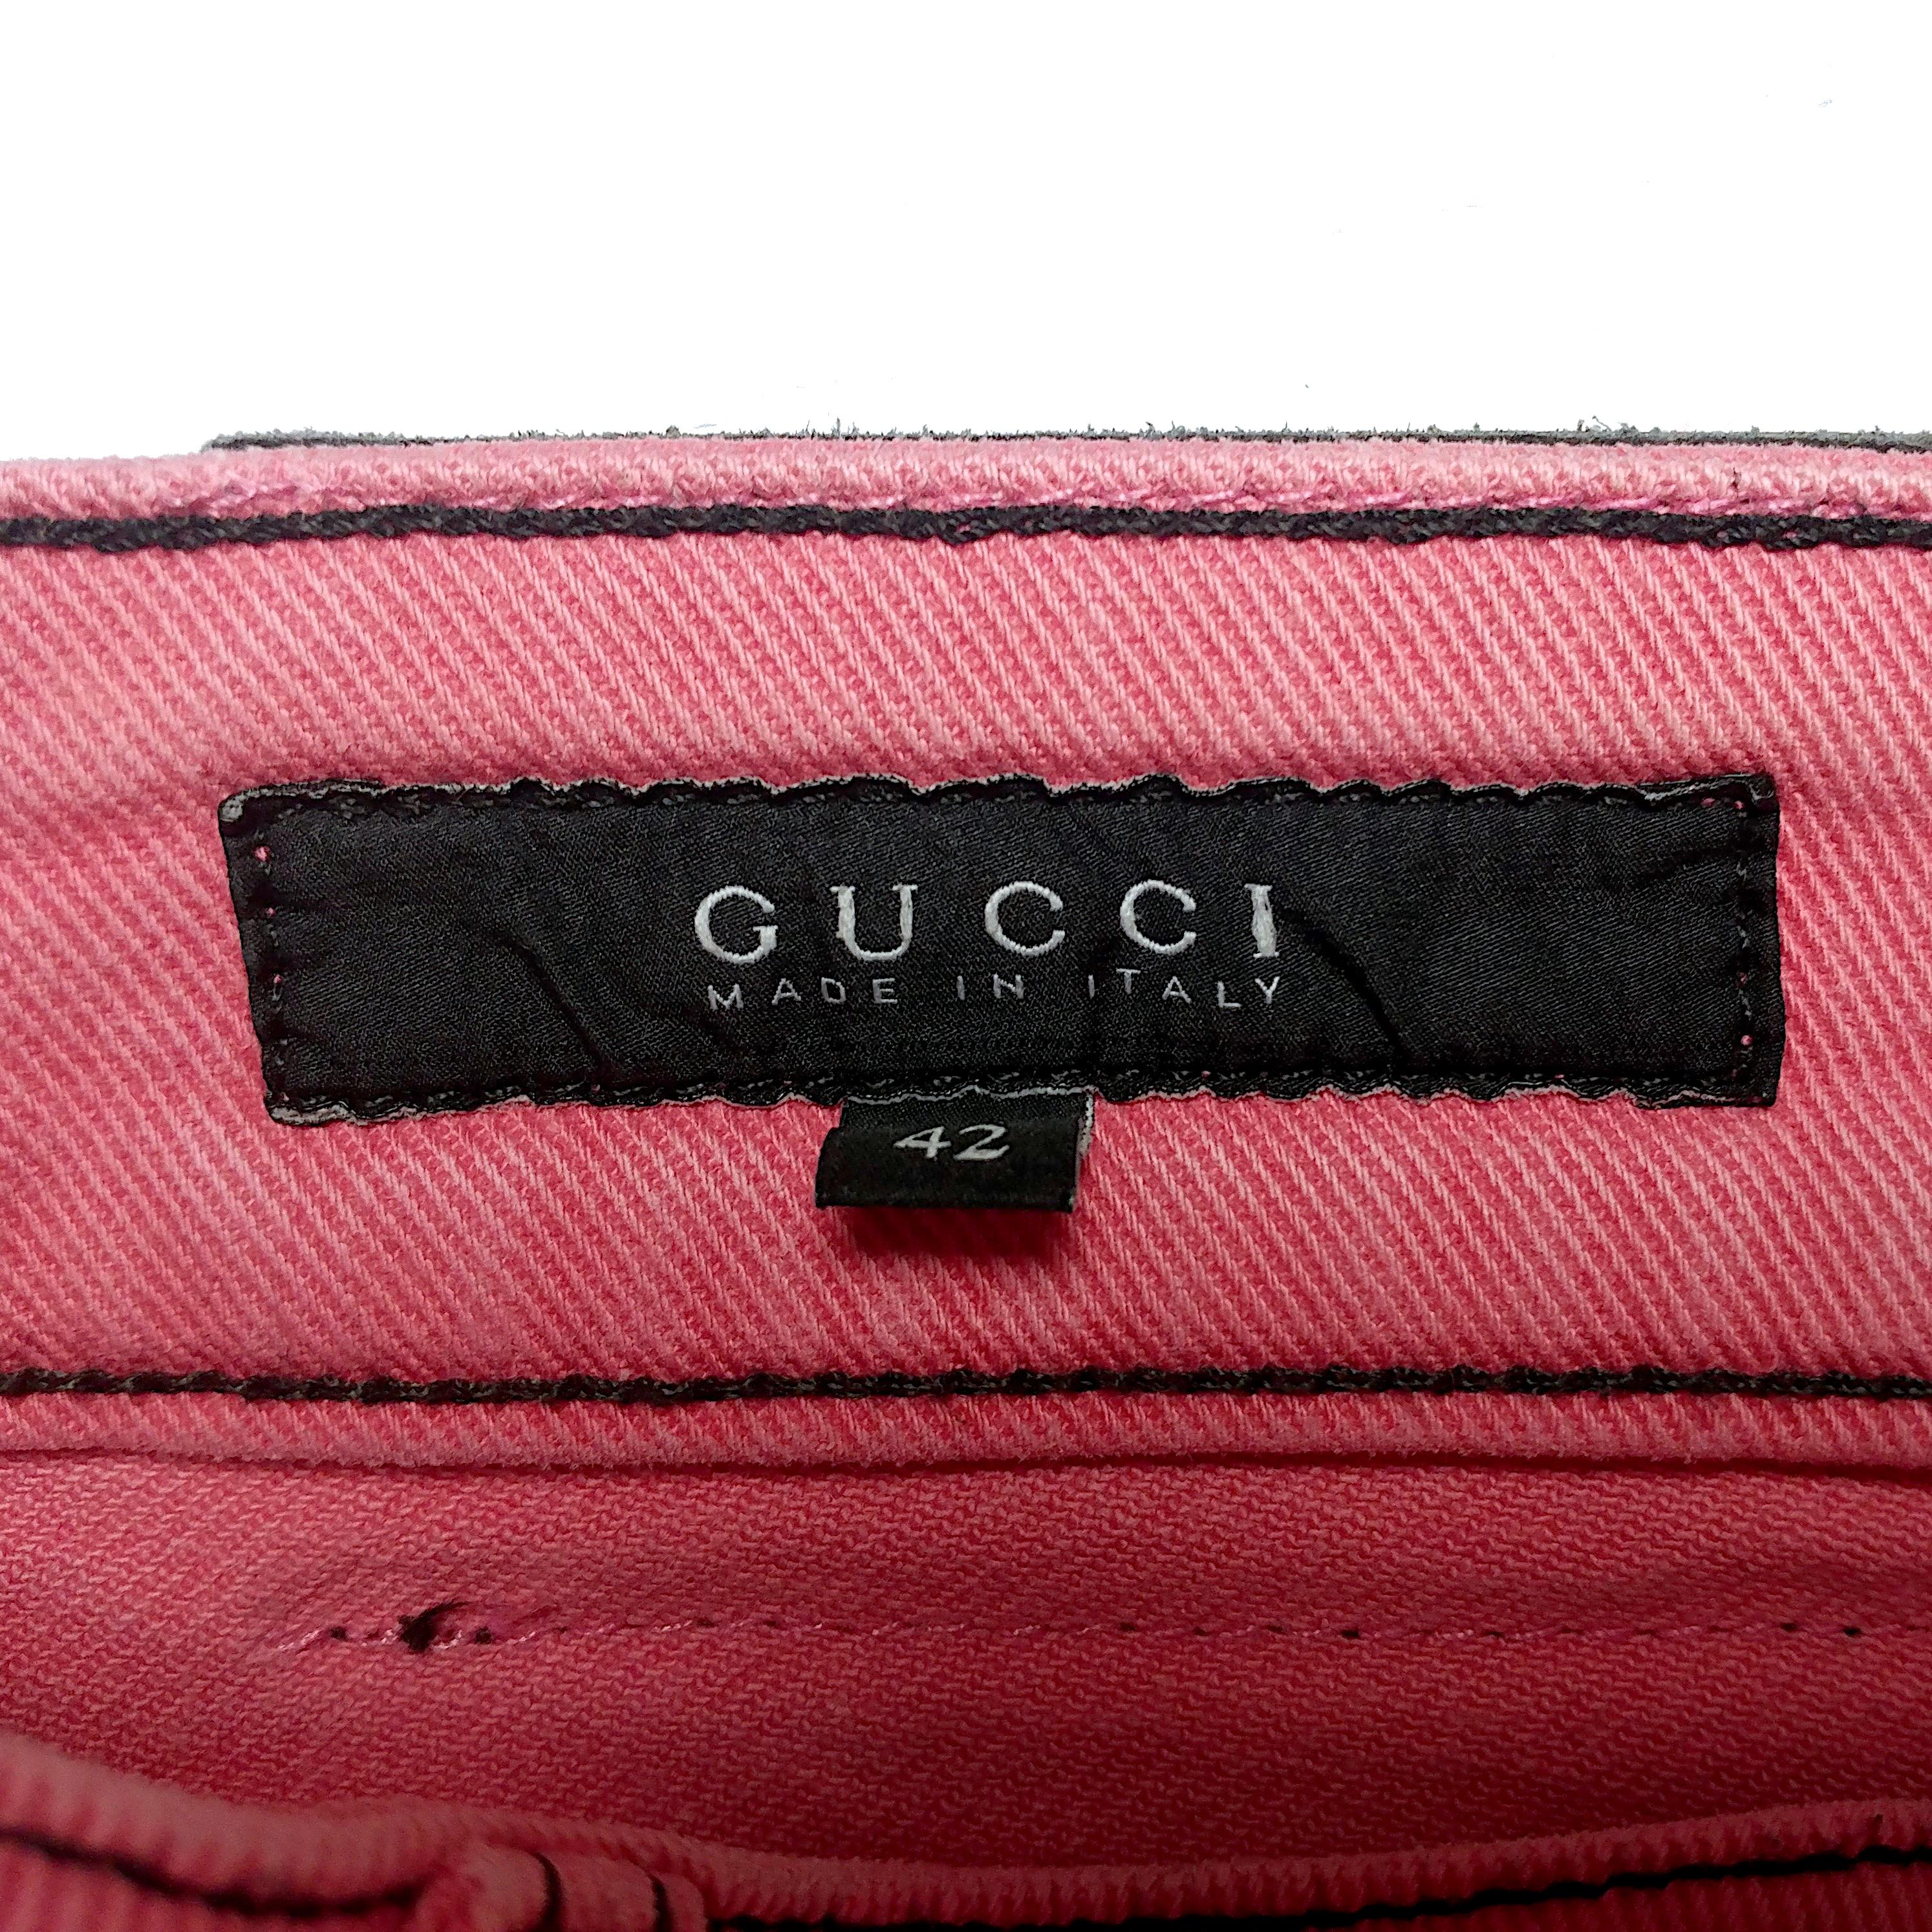 GUCCI - Vintage Pink Jeans with Black Stitchings and Patches  Size 6US 38EU 2